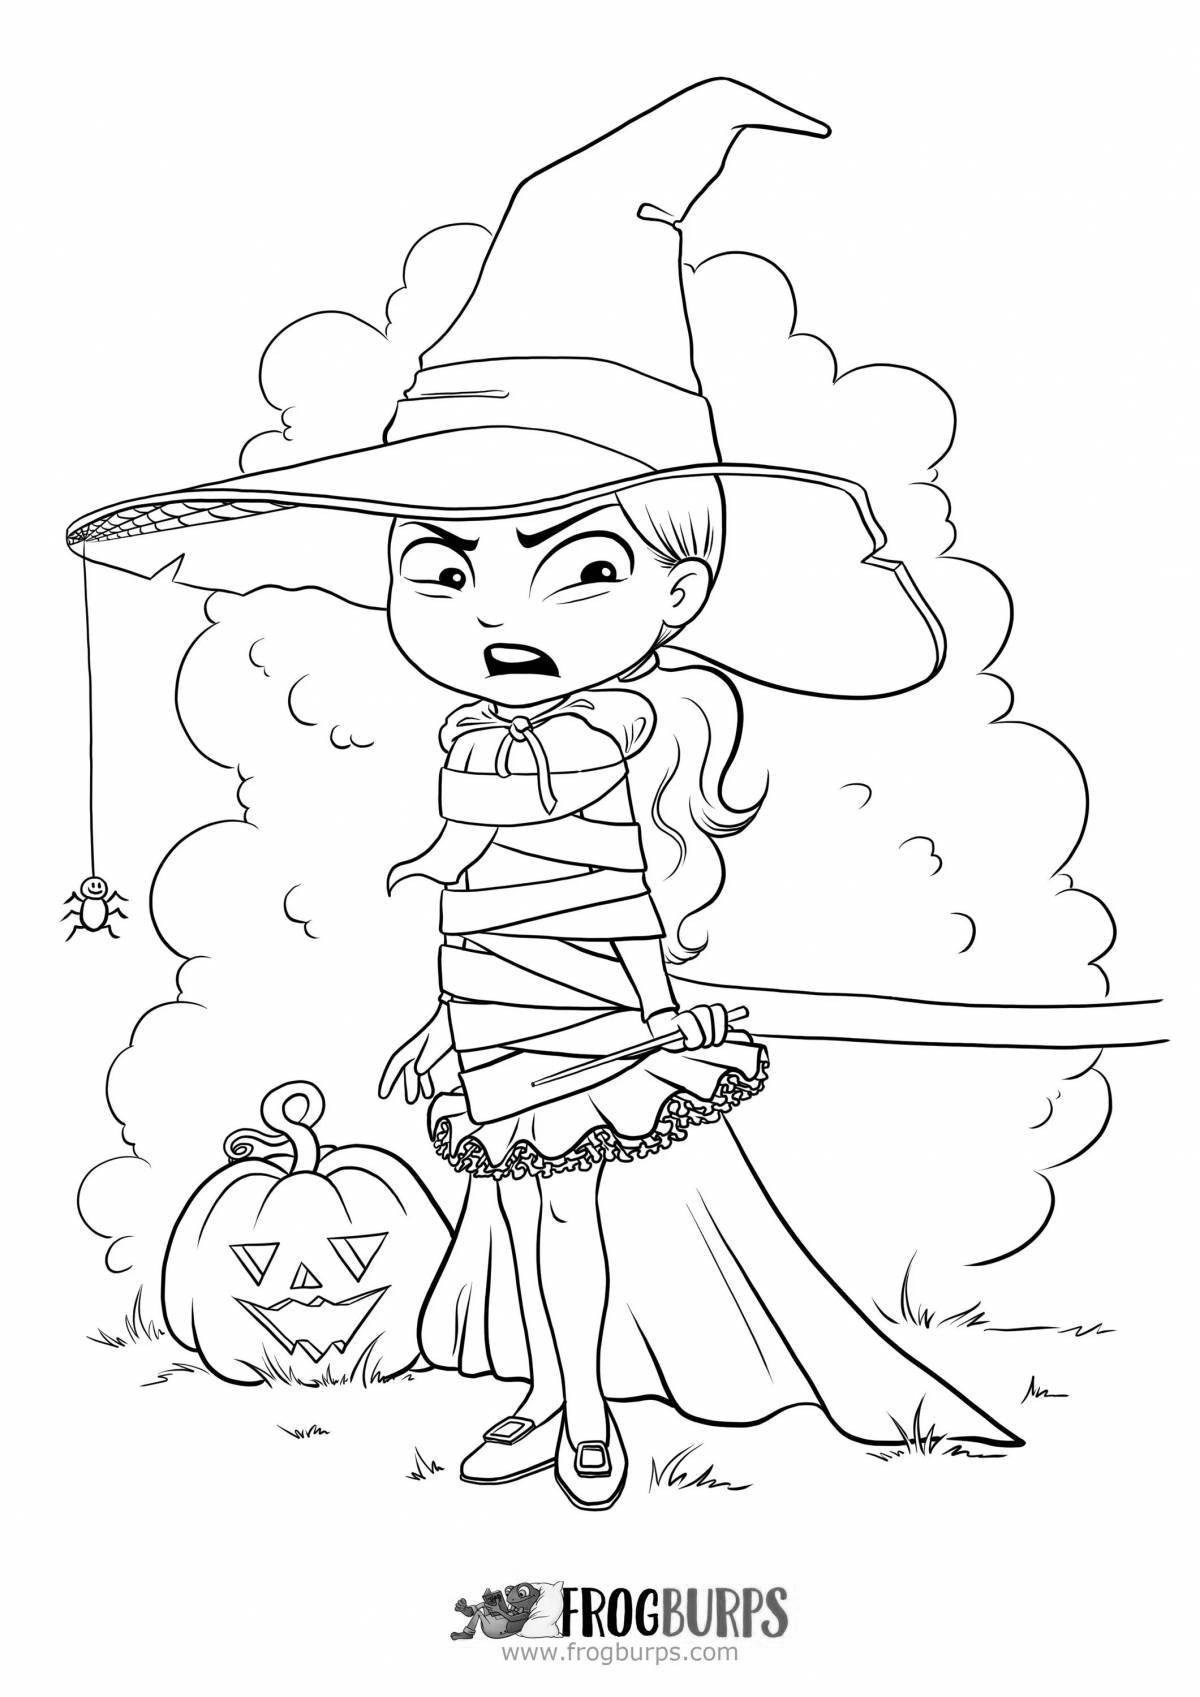 Chilling coloring book for real witches